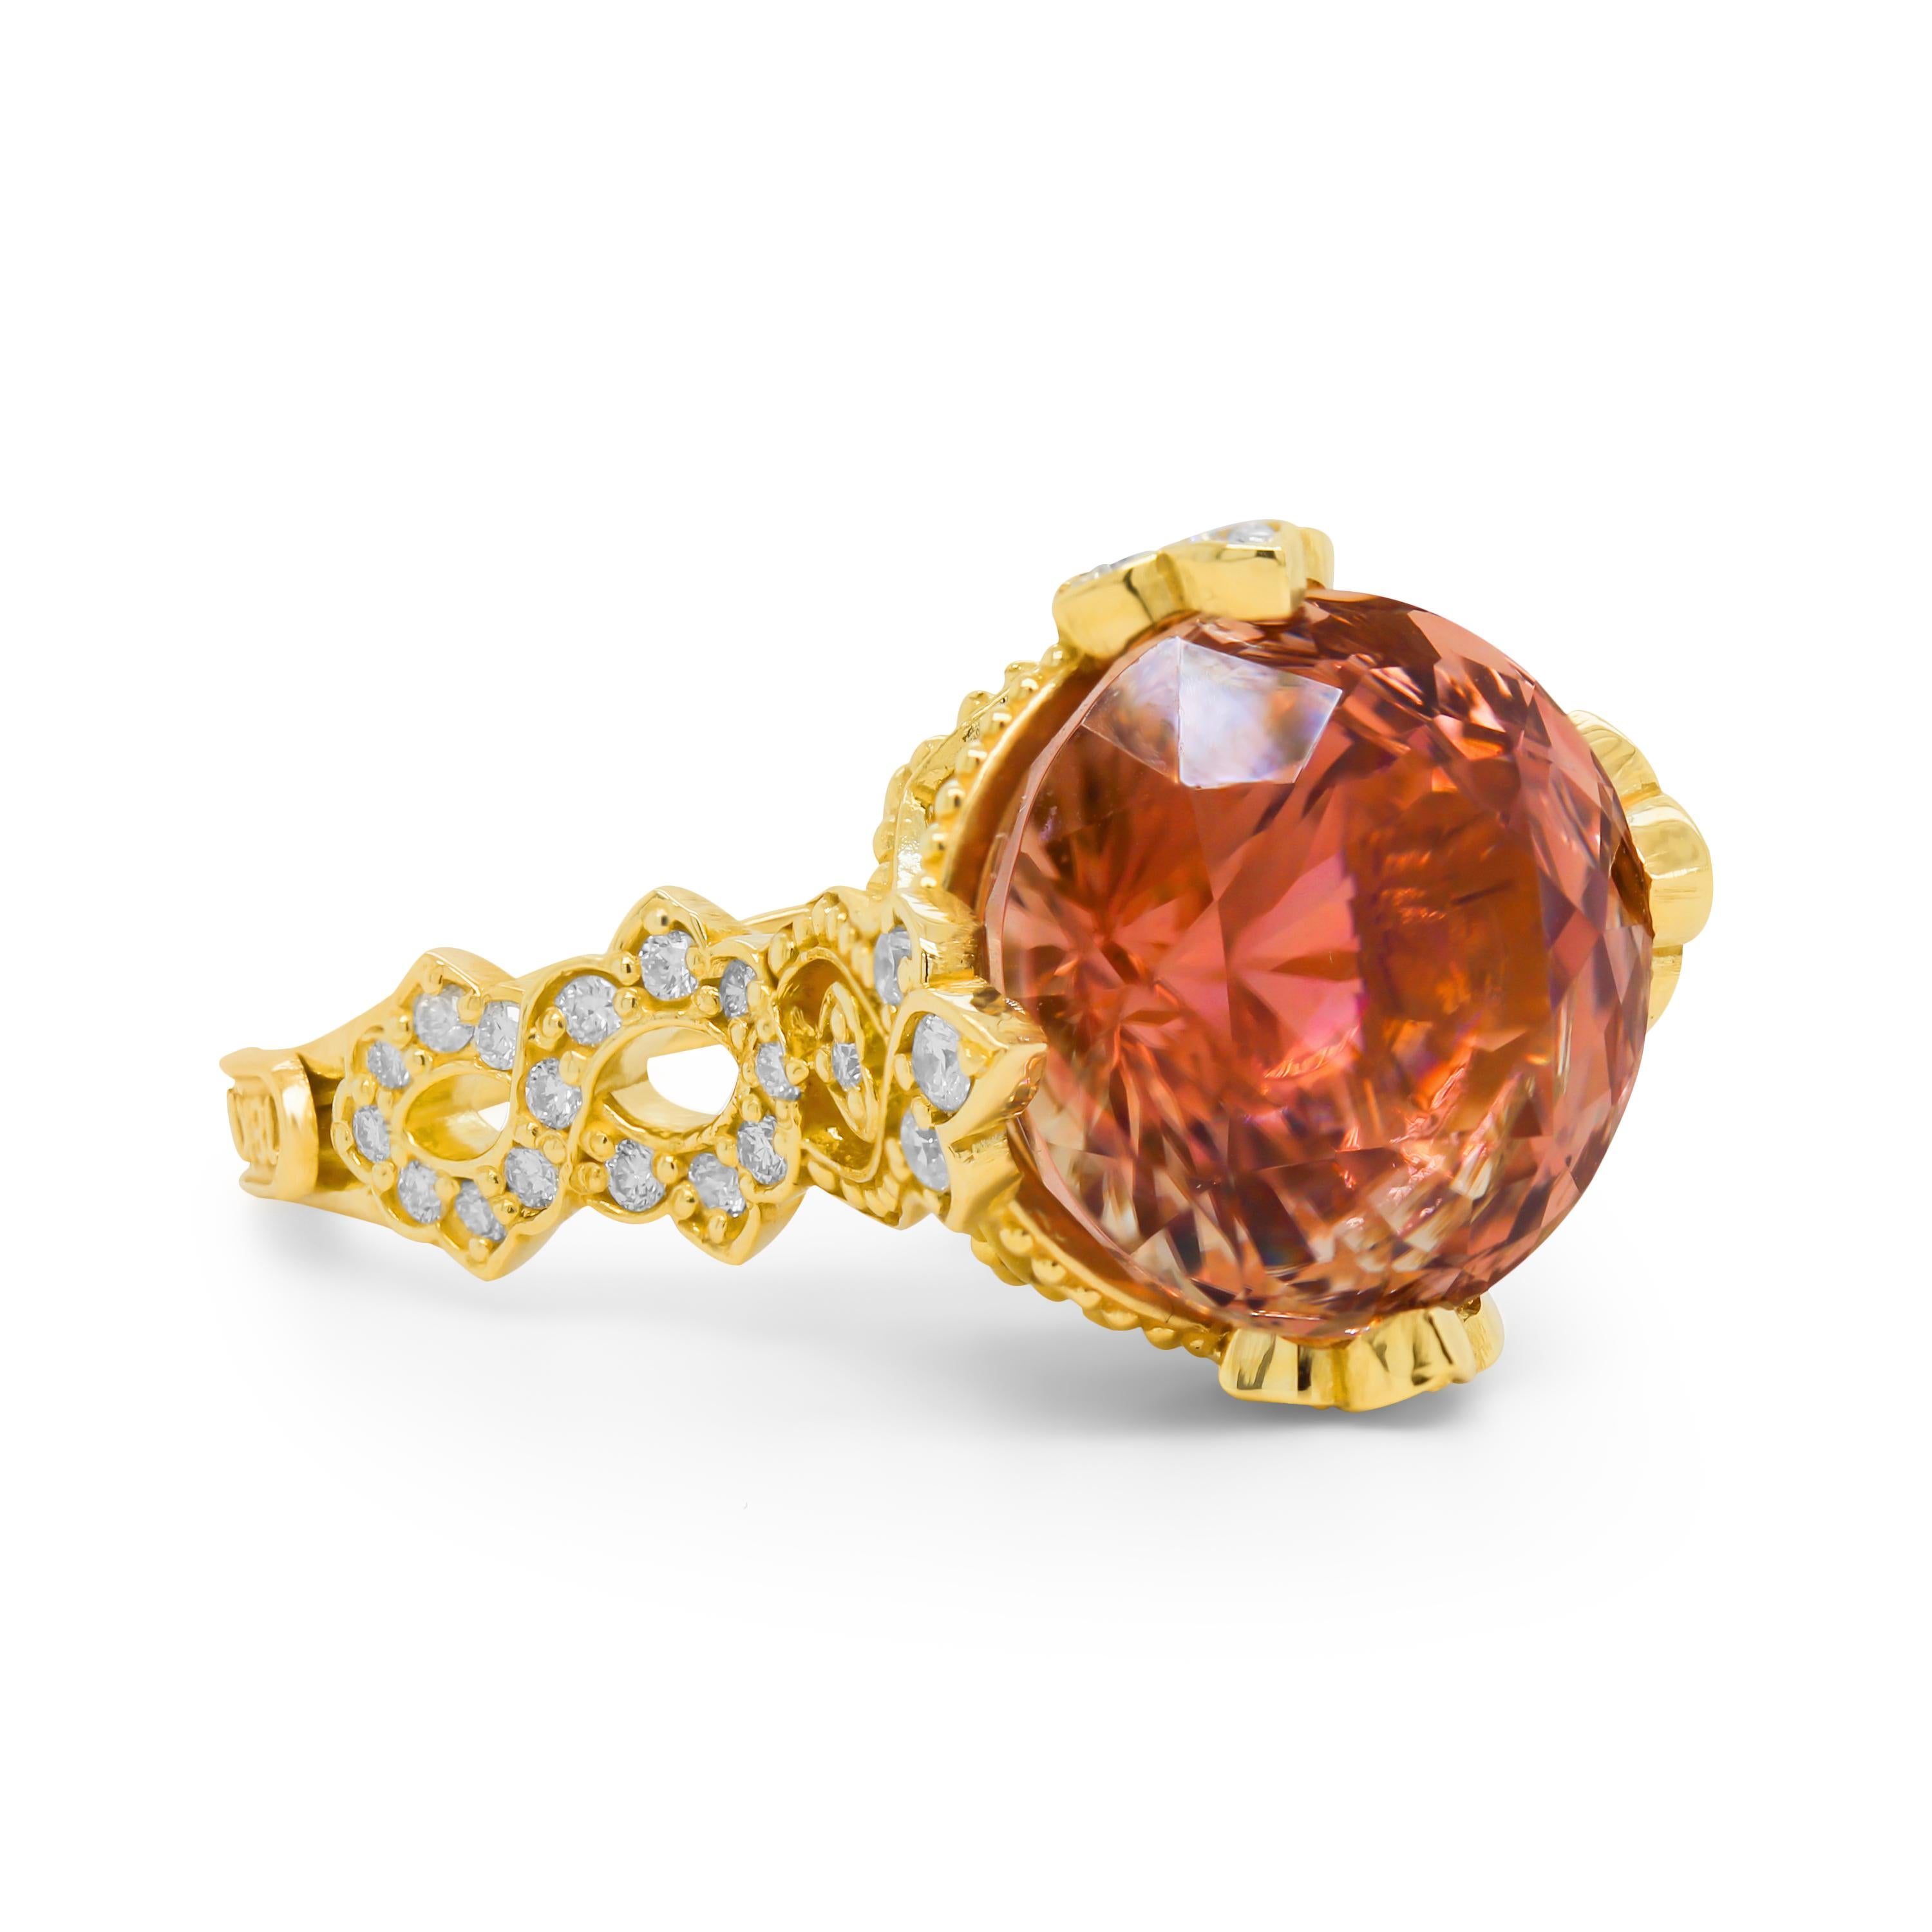 Stambolian 18K Gold Diamonds Color Changing Red Orange Pink Tourmaline Ring

A one-of-a-kind ring featuring a round, color-changing Tourmaline center with hints of red, orange, and pinks. Ring is handmade in solid 18k green gold and features